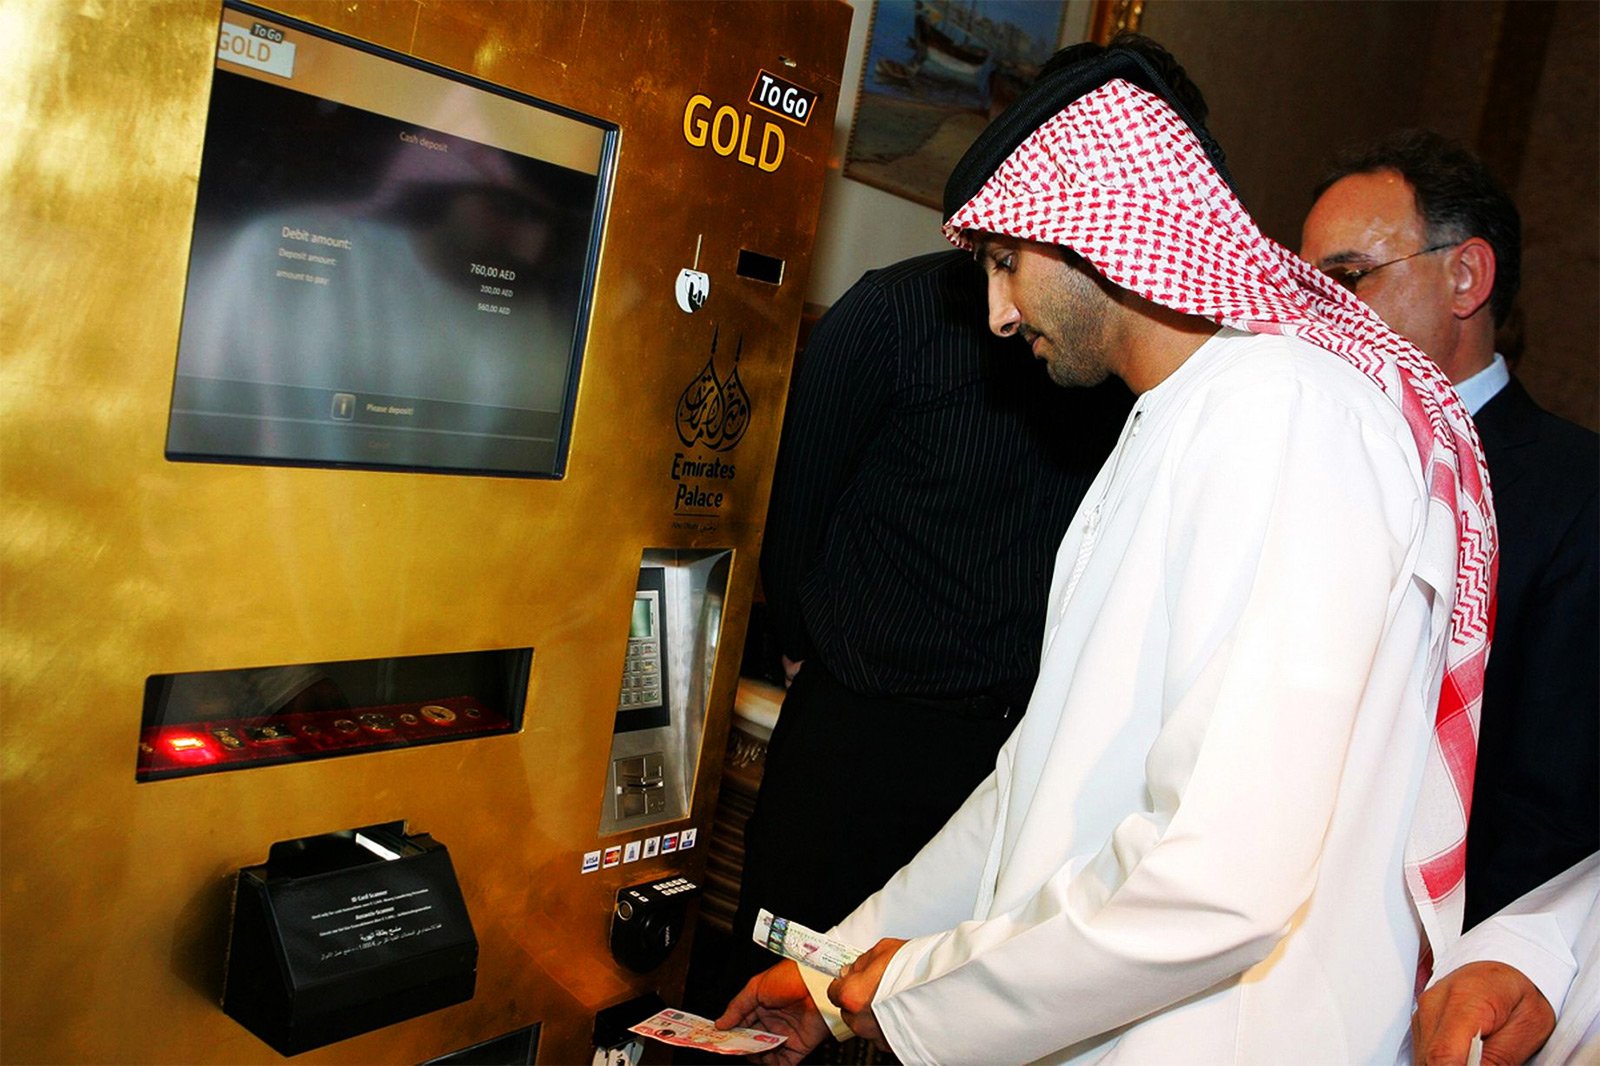 How to get gold from an ATM in Abu Dhabi